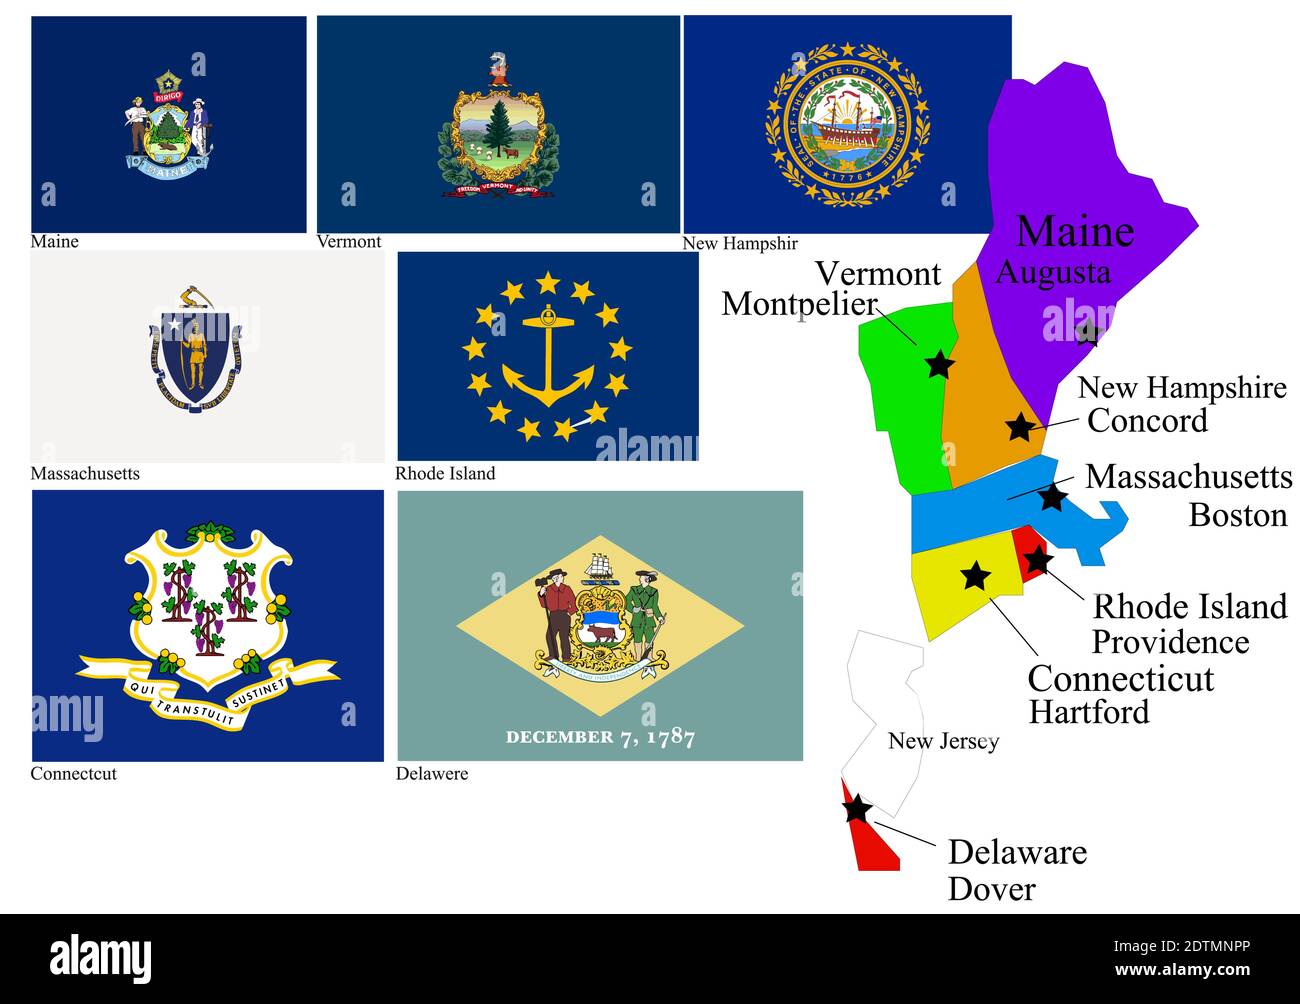 East  States (Maine, Vermont, New Hampshir, Massachusetts,Rhode Island, Connecticut, Delawere) of Usa flag and map, vector illustration Stock Vector